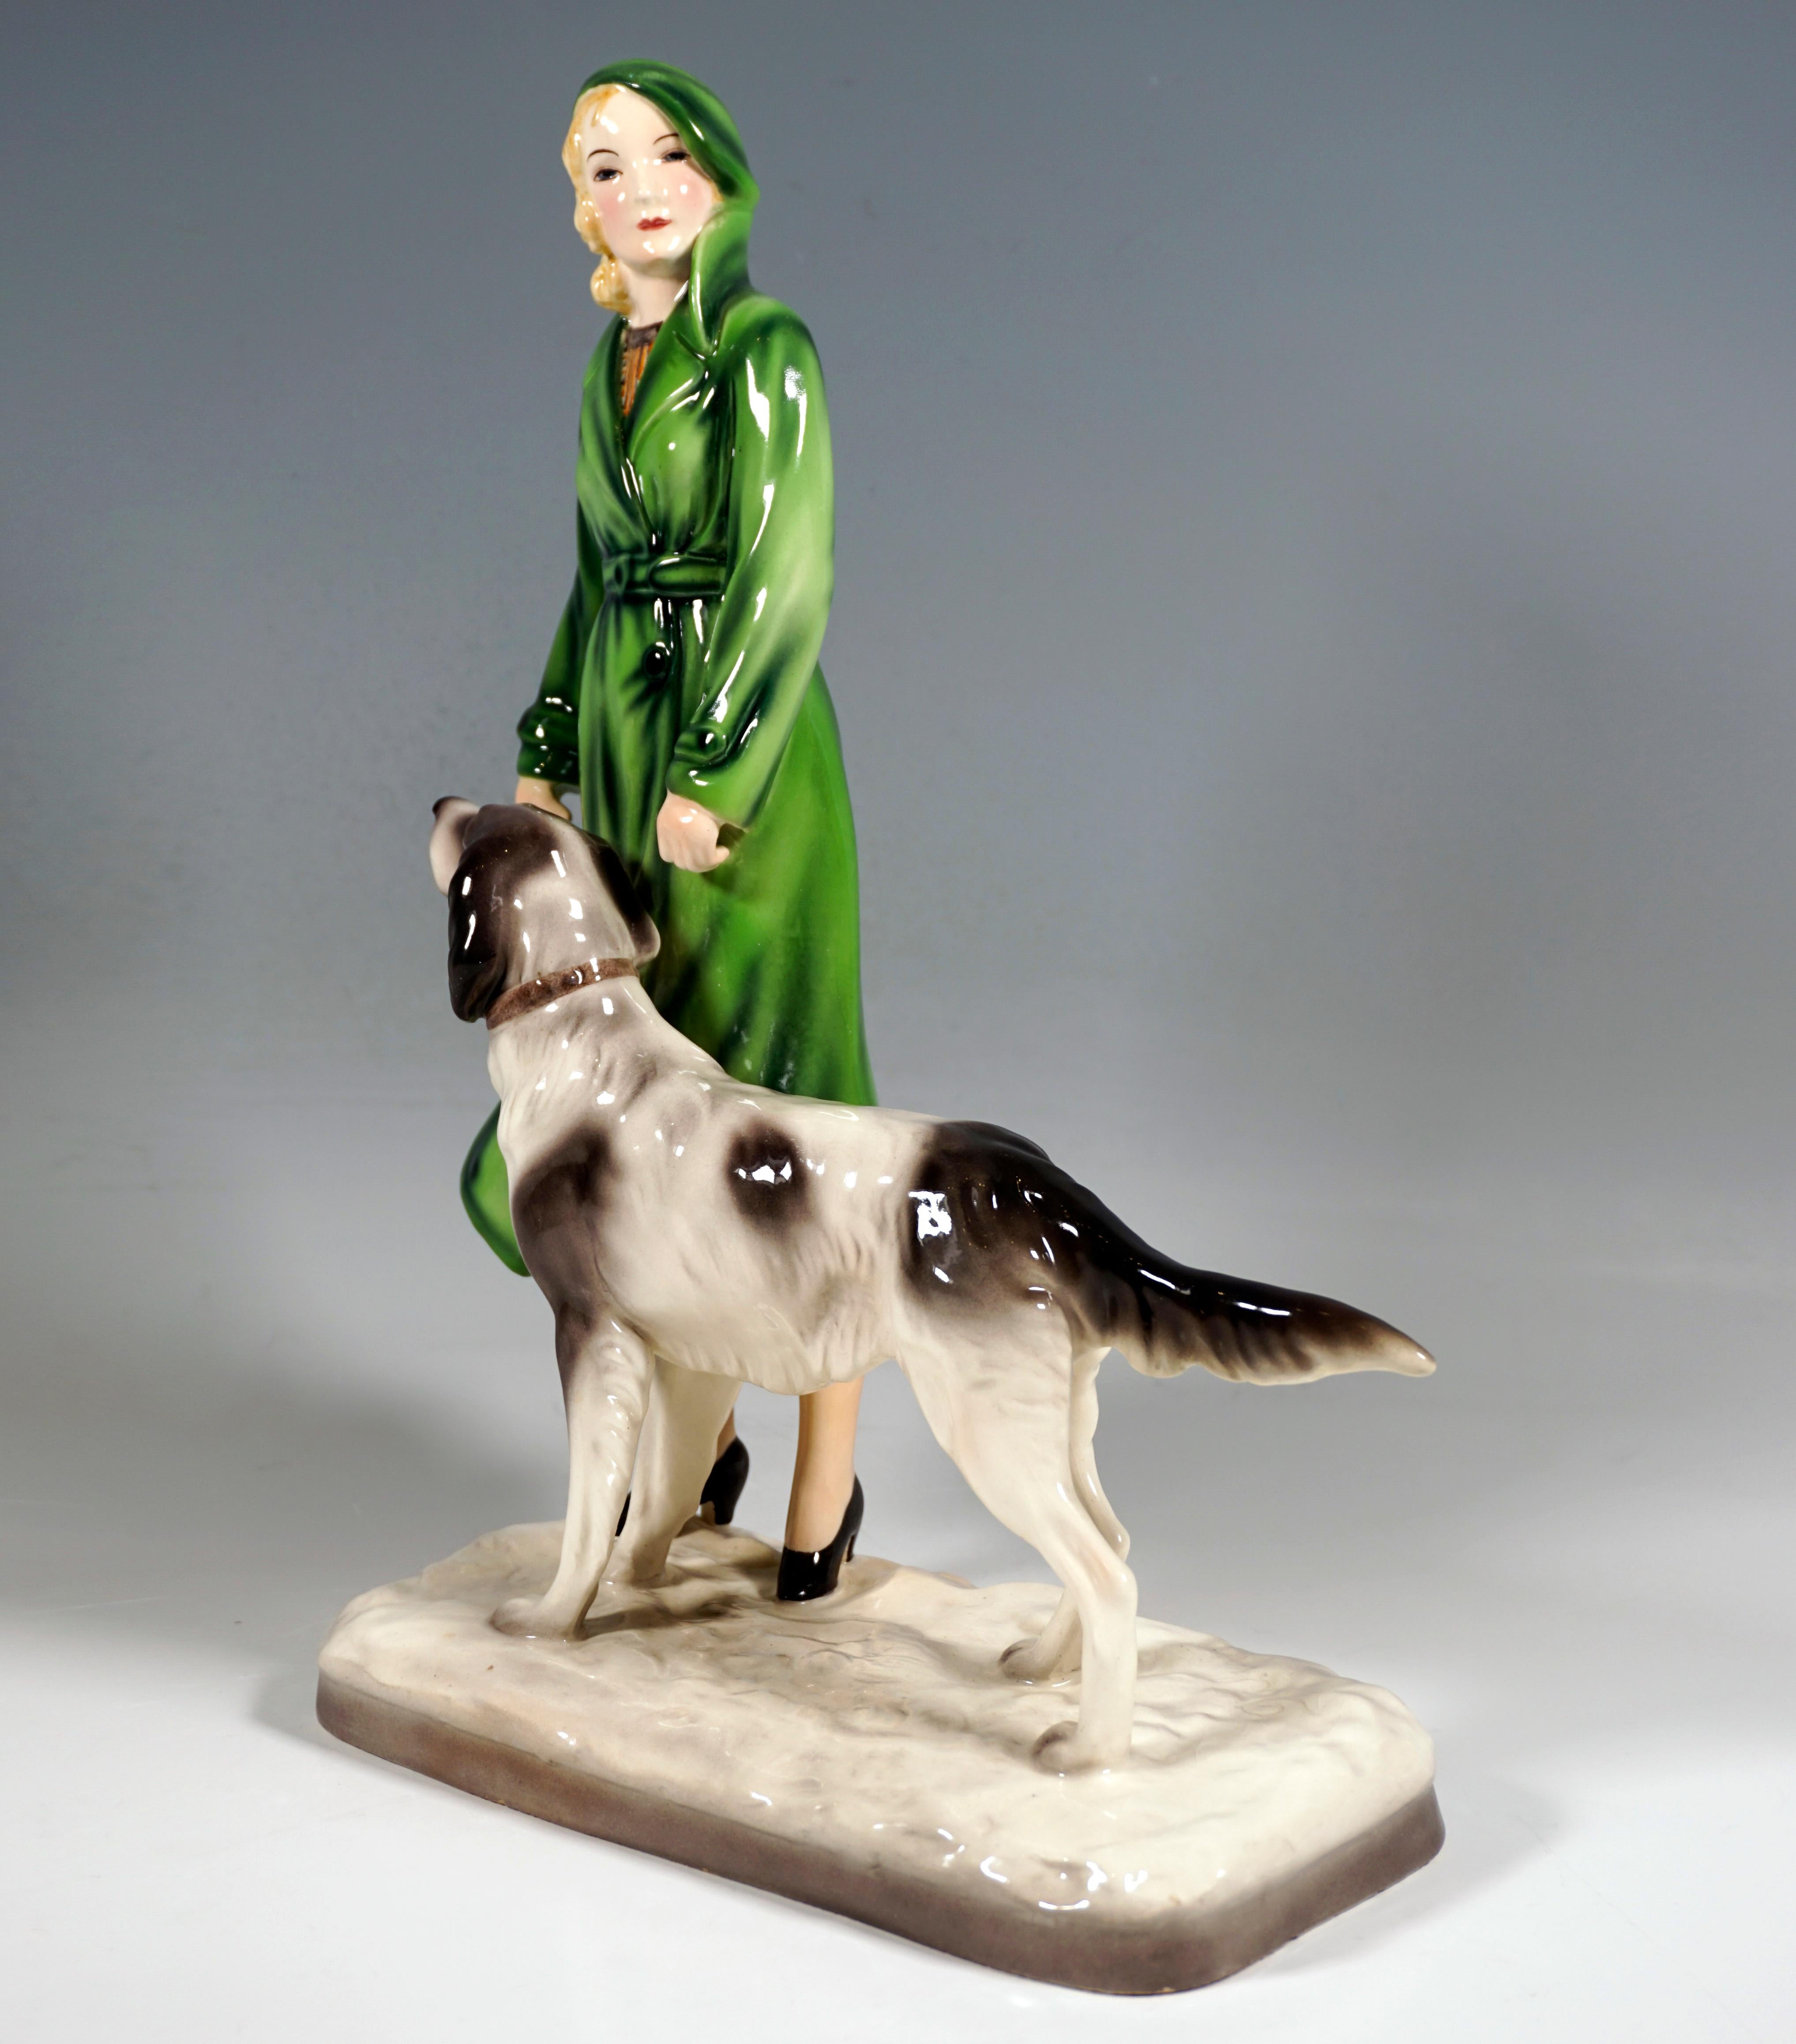 Very Rare Goldscheider Vienna ceramic Figurine of the 1930s:
Standing blond lady with cap and coat, showing great resemblance to Marlene Dietrich, with setter.
On a cream-colored rectangular base with rounded corners and an uneven surface, shaded